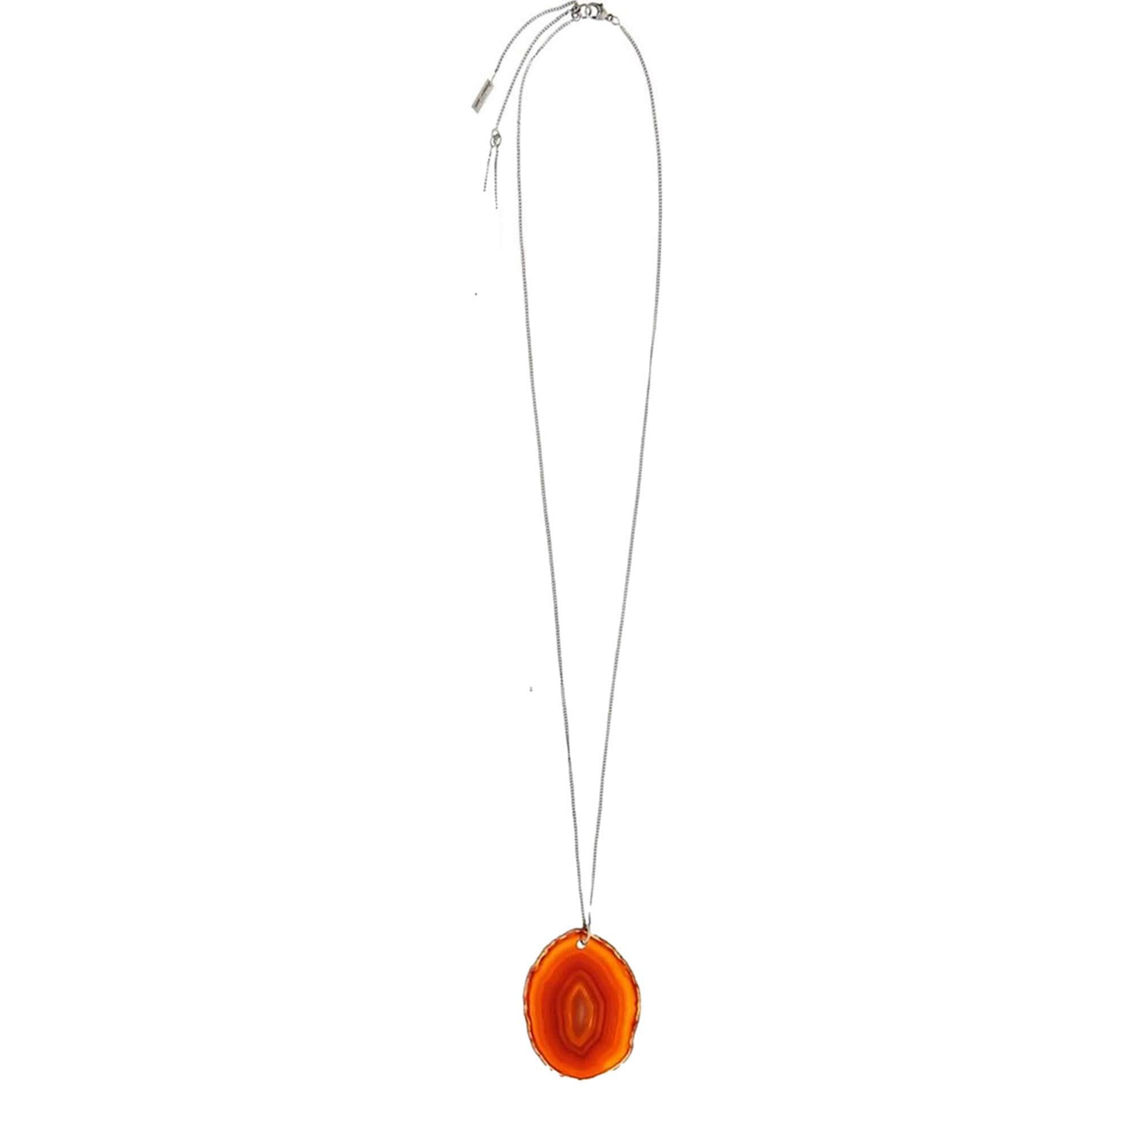 Saint Laurent Agate Necklace Orange Brown Stone Silver Brass Chain (New) - Image 2 of 4